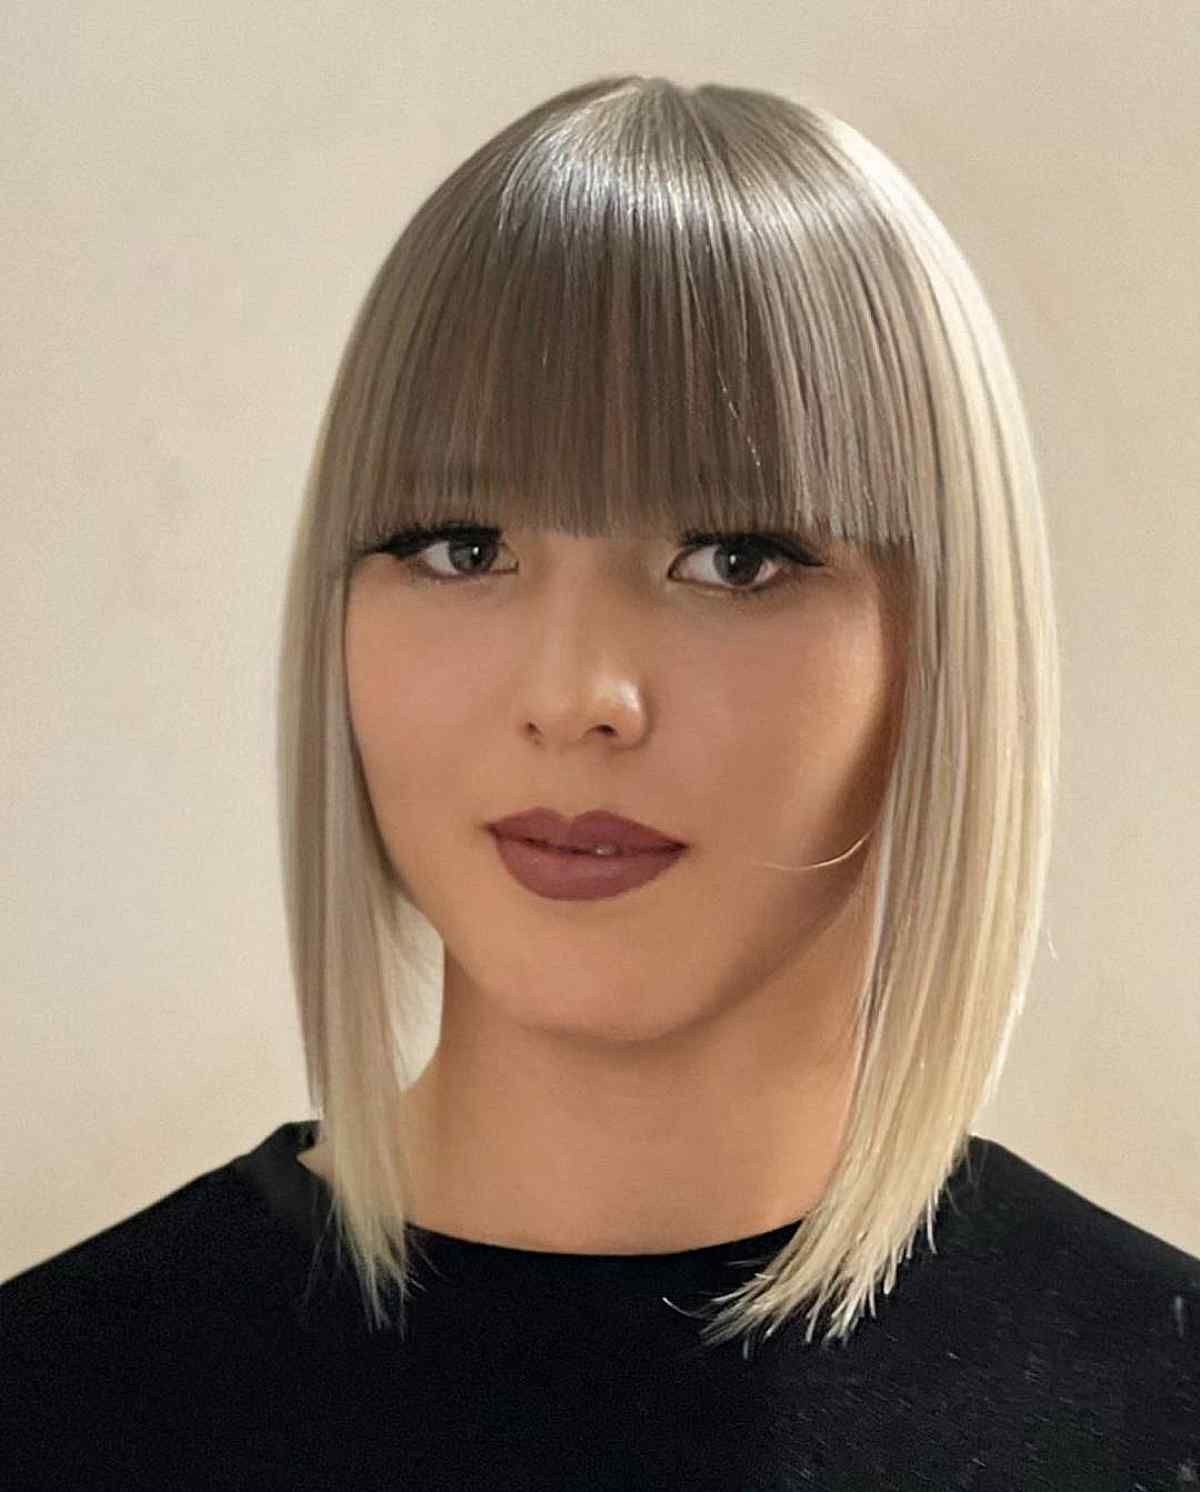 42 Trendiest Long Bob With Bangs + What To Consider Before Getting This With Regard To Fashionable Medium Bob With Long Parted Bangs (View 2 of 20)